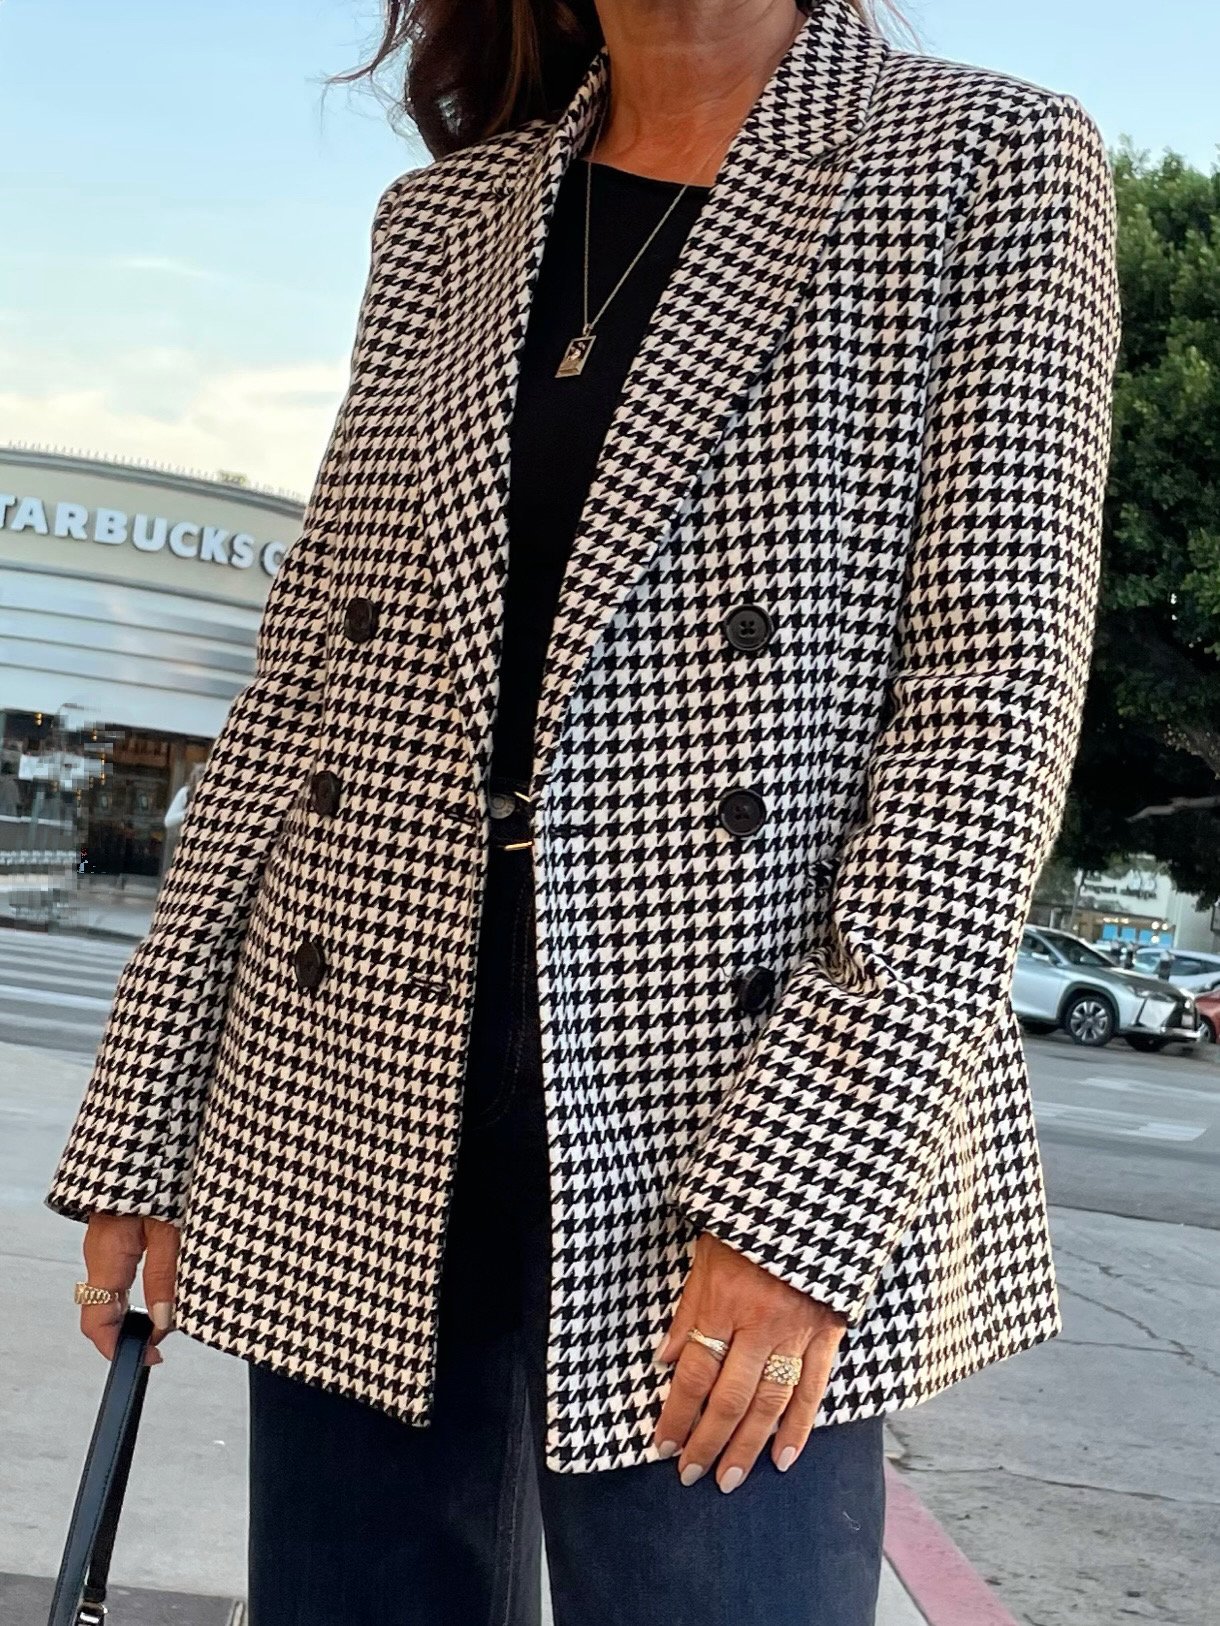 Transition Into Spring With This Houndstooth Blazer — The Glow